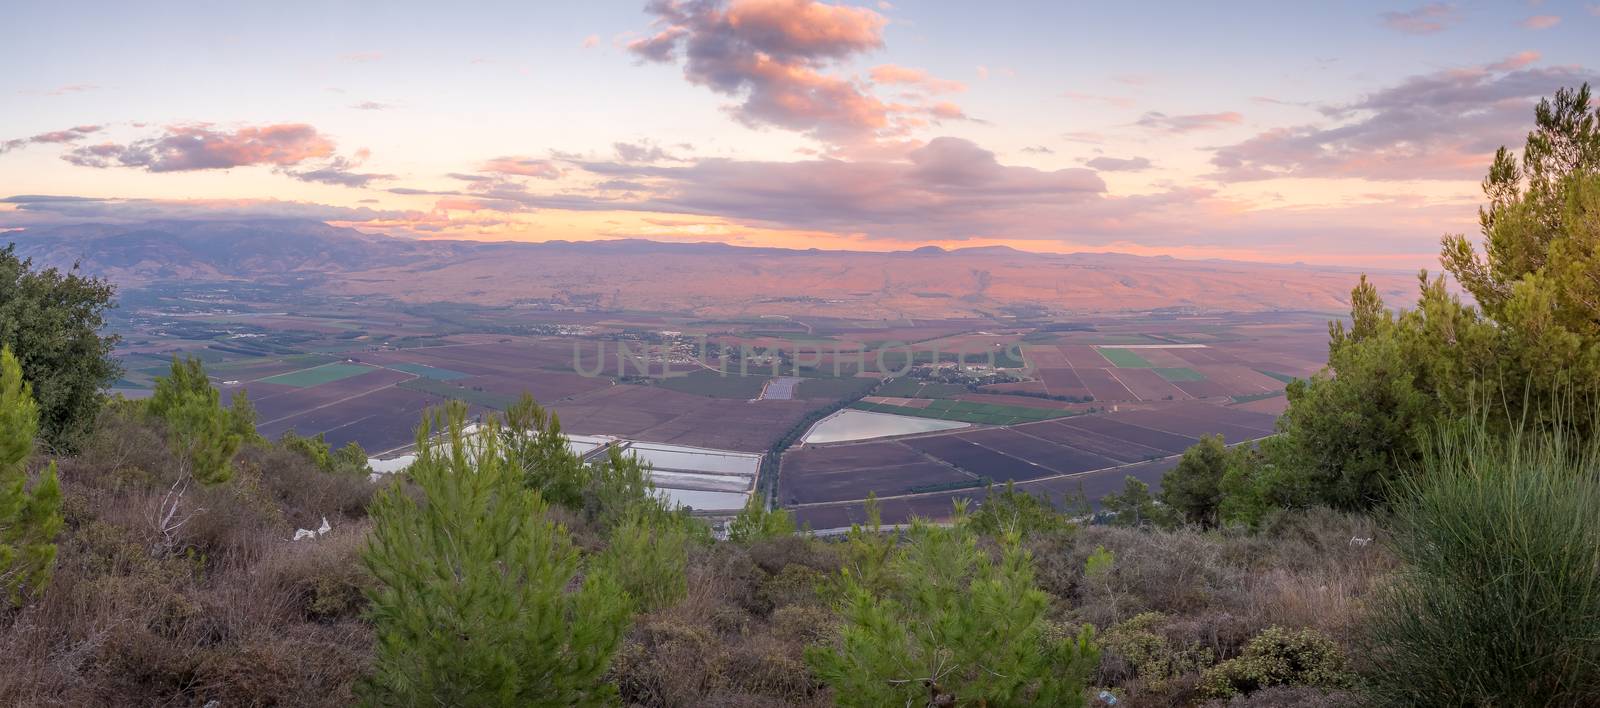 Panoramic sunset view of the Hula valley by RnDmS